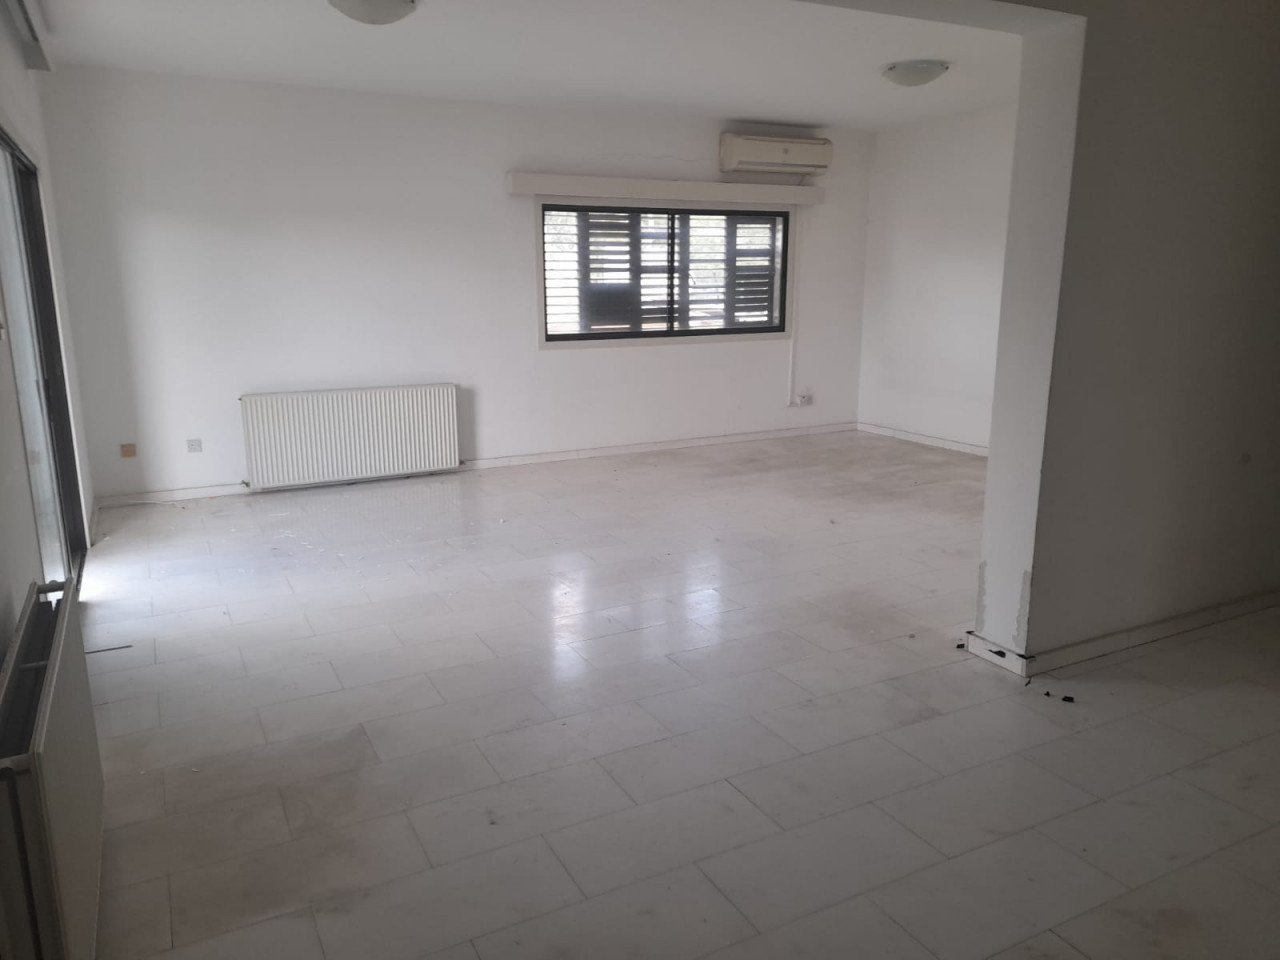 For Sale: Apartment (Flat) in Lykavitos, Nicosia for Rent | Key Realtor Cyprus